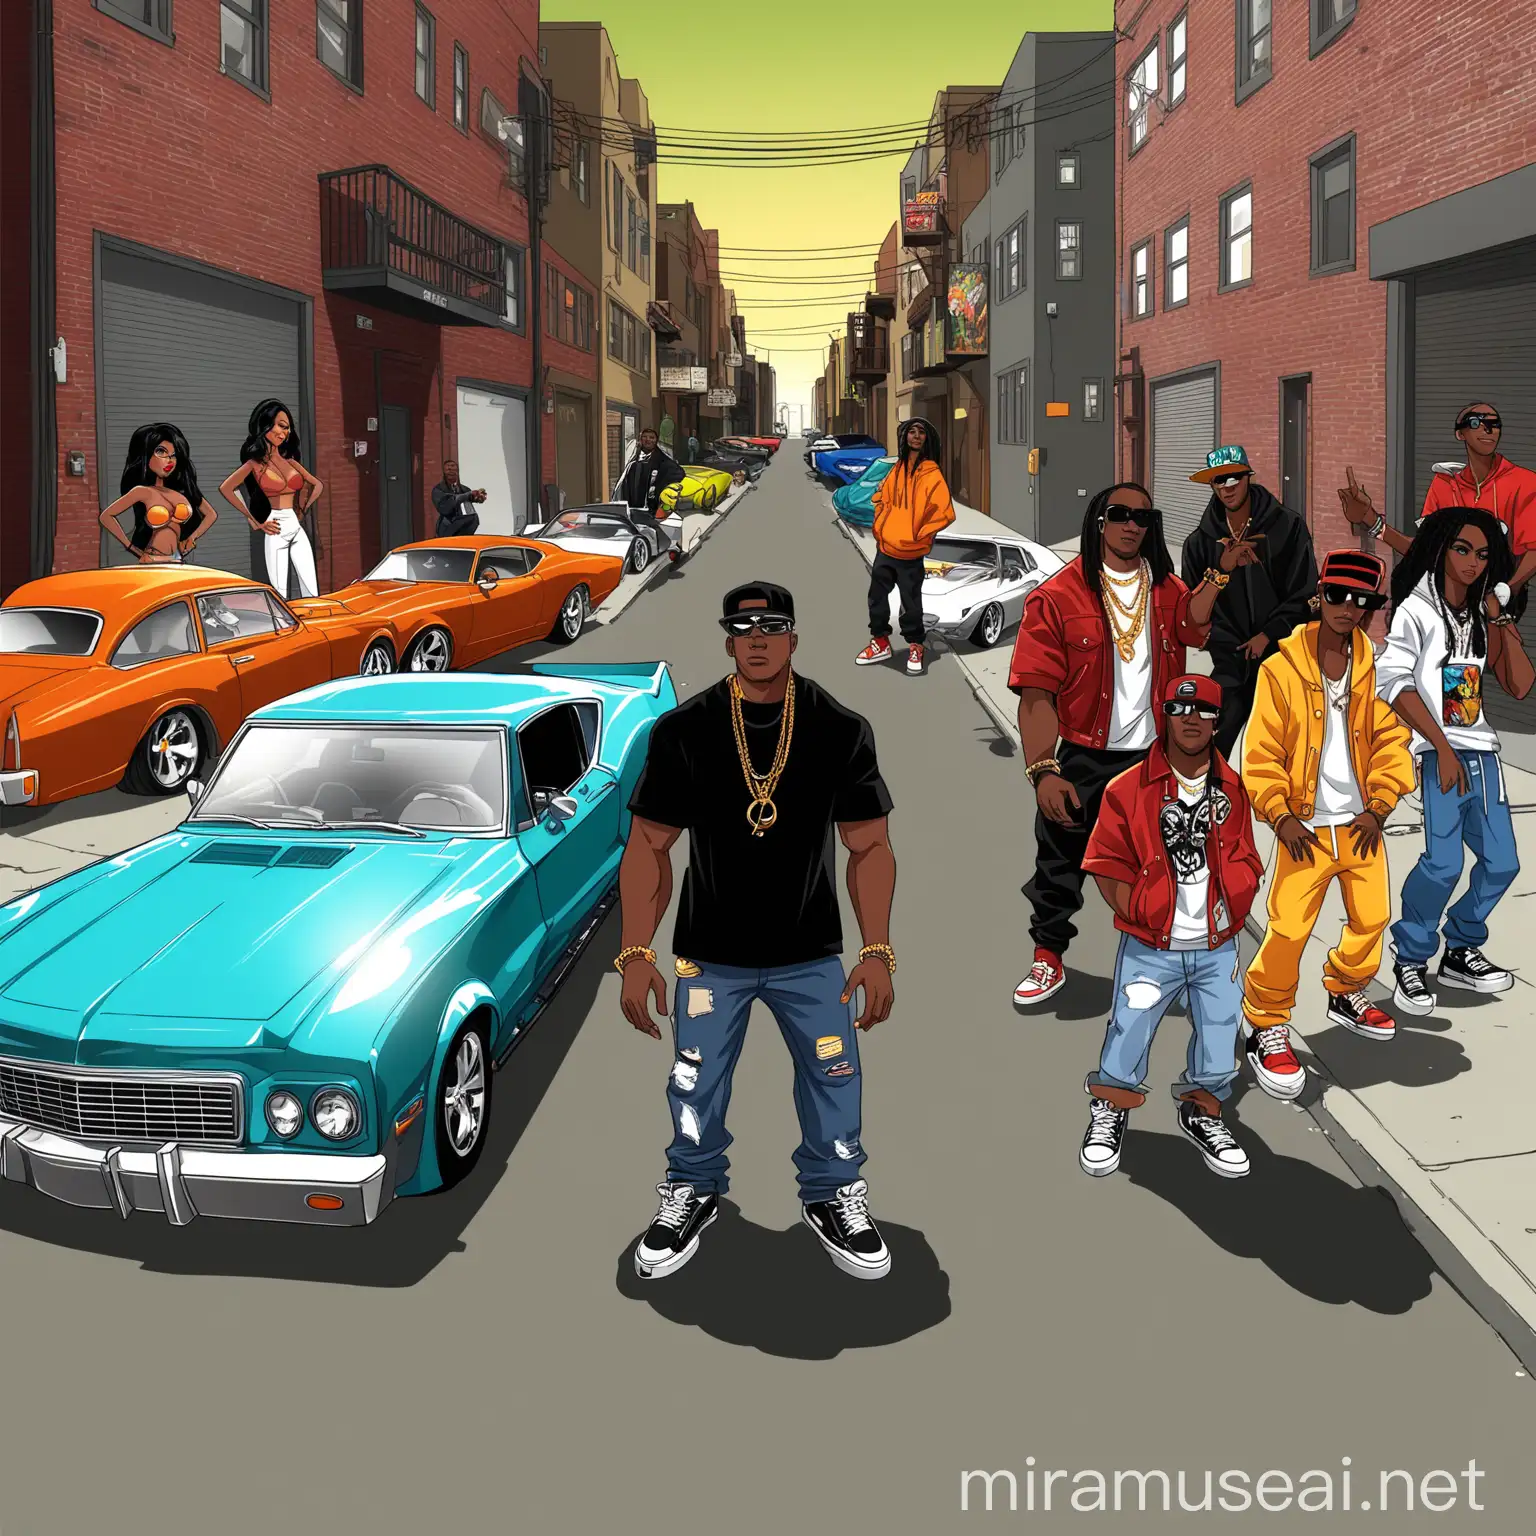 African americans People in West coast hip hop album cover music video and flashy cars in alley 2015 cartoon model